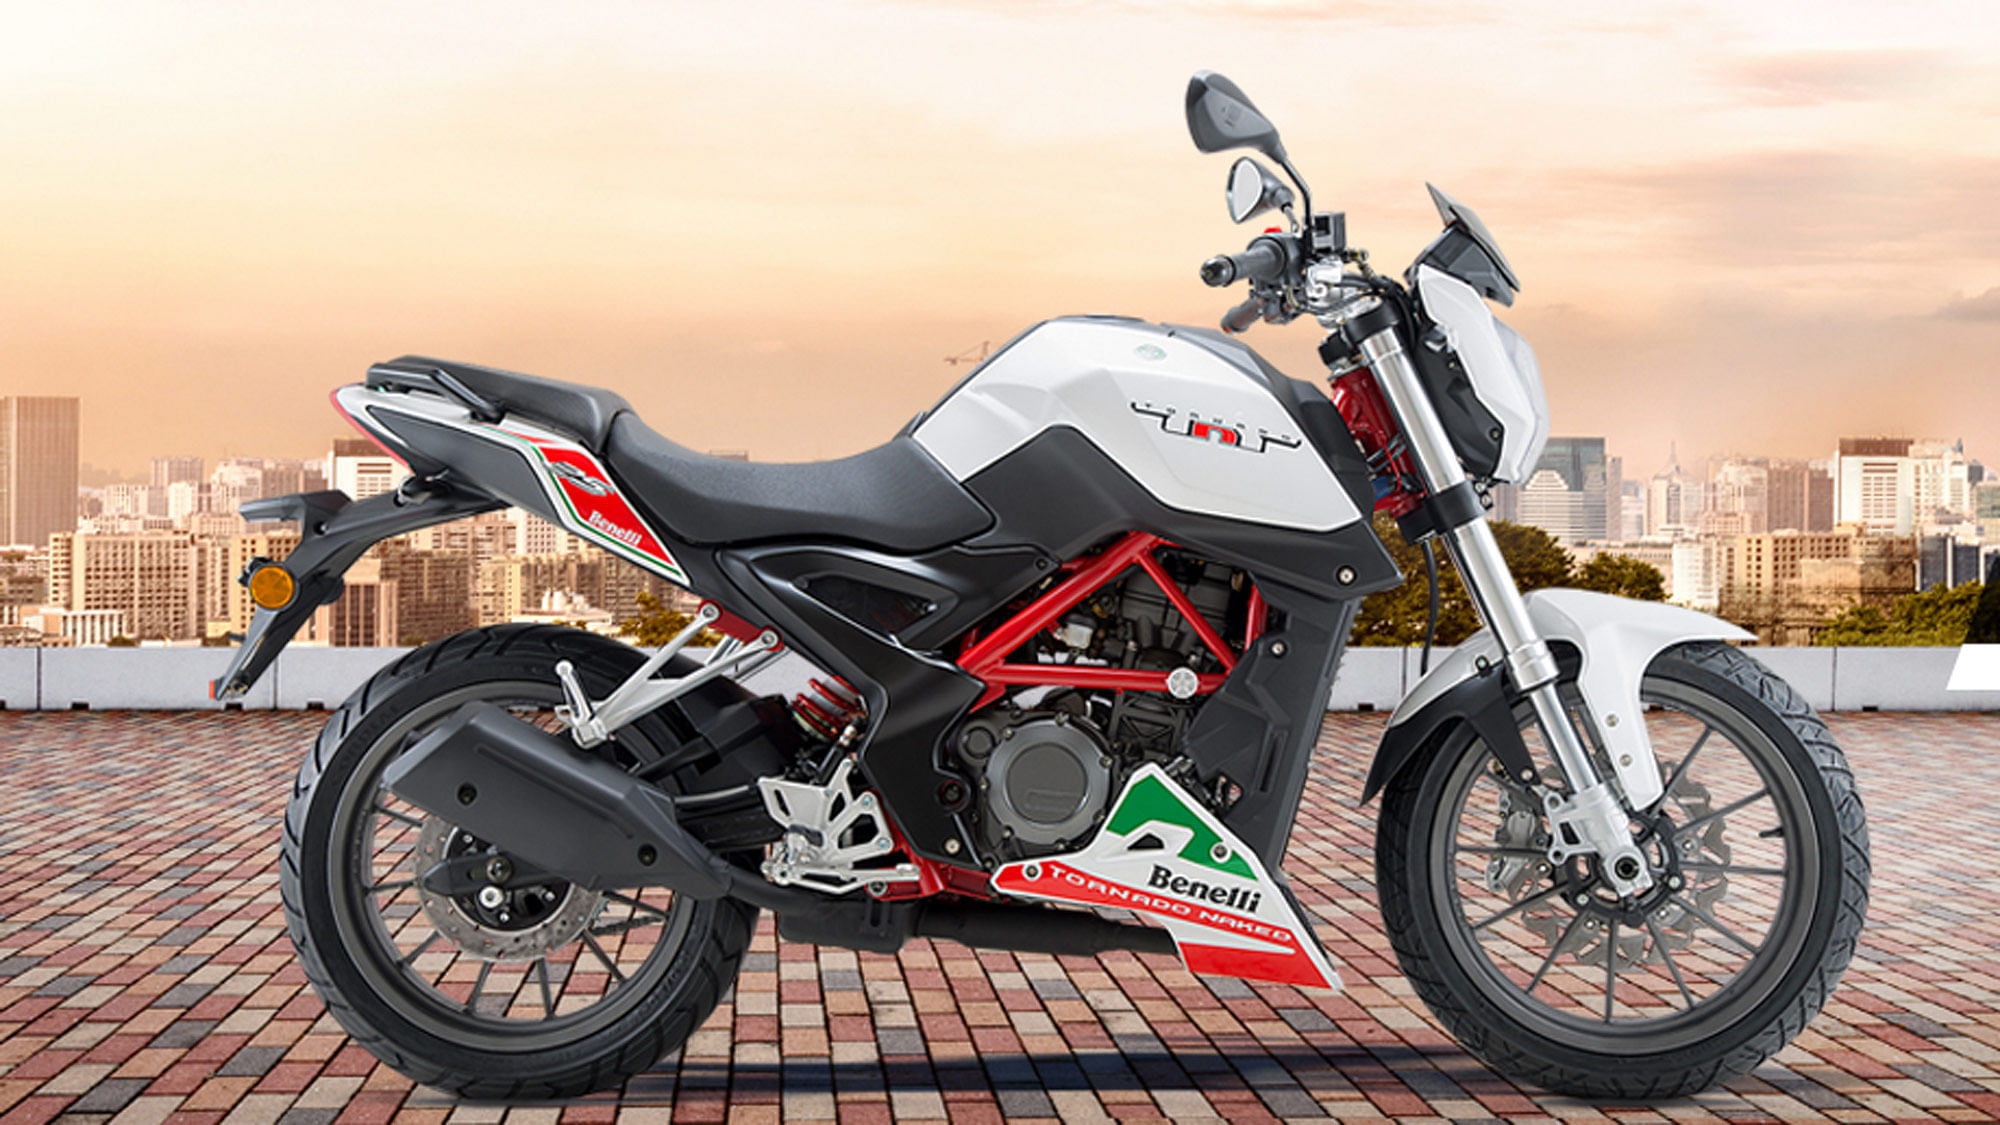 The DSK Benelli TNT 25 comes with a 6-speed transmission. (Photo: <a href="http://www.dskbenelli.com/tnt-25.php">DSK Benelli</a>)